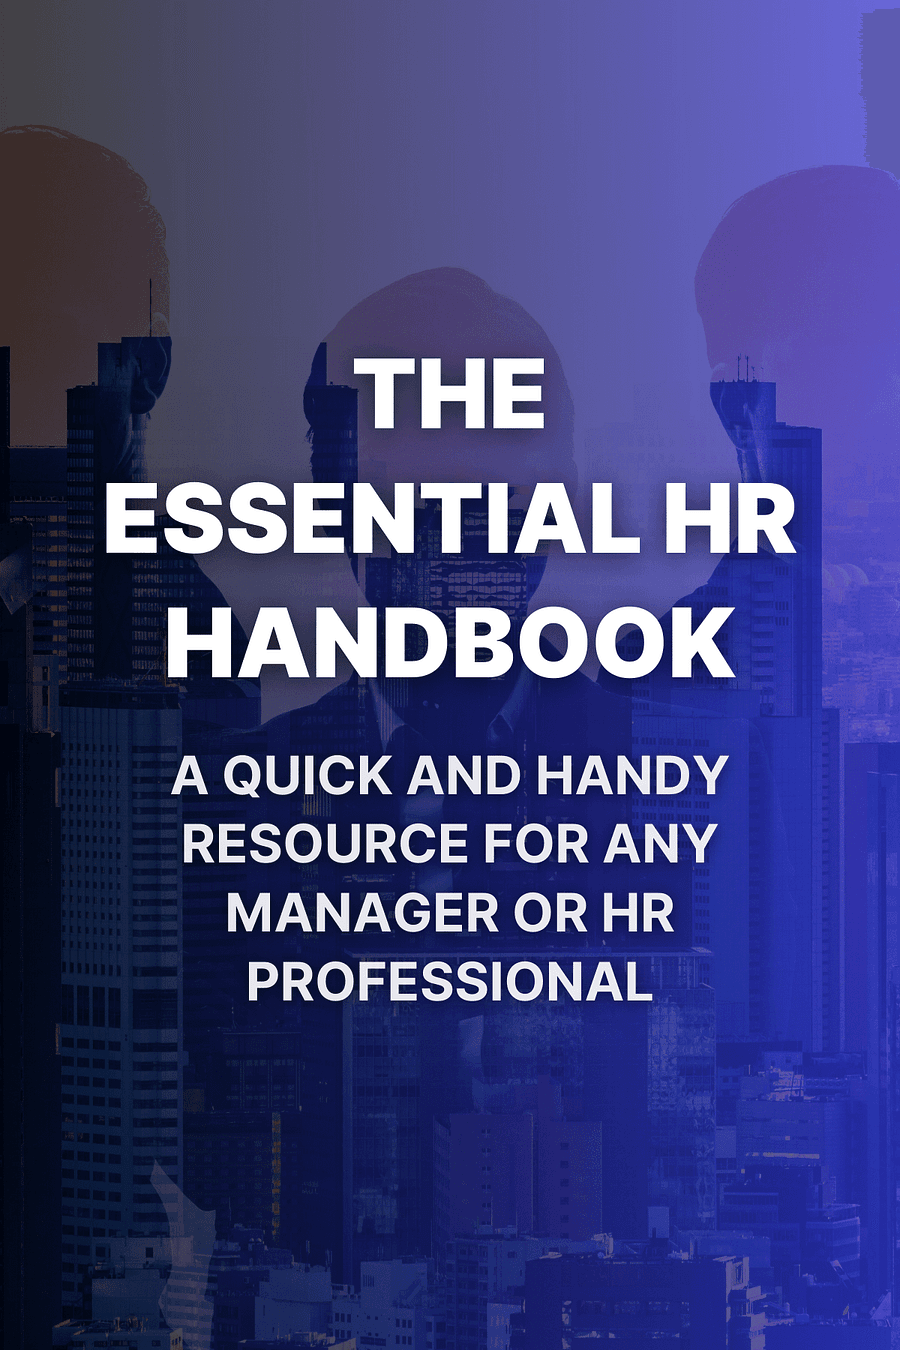 The Essential HR Handbook, 10th Anniversary Edition by Sharon Armstrong, Barbara Mitchell - Book Summary